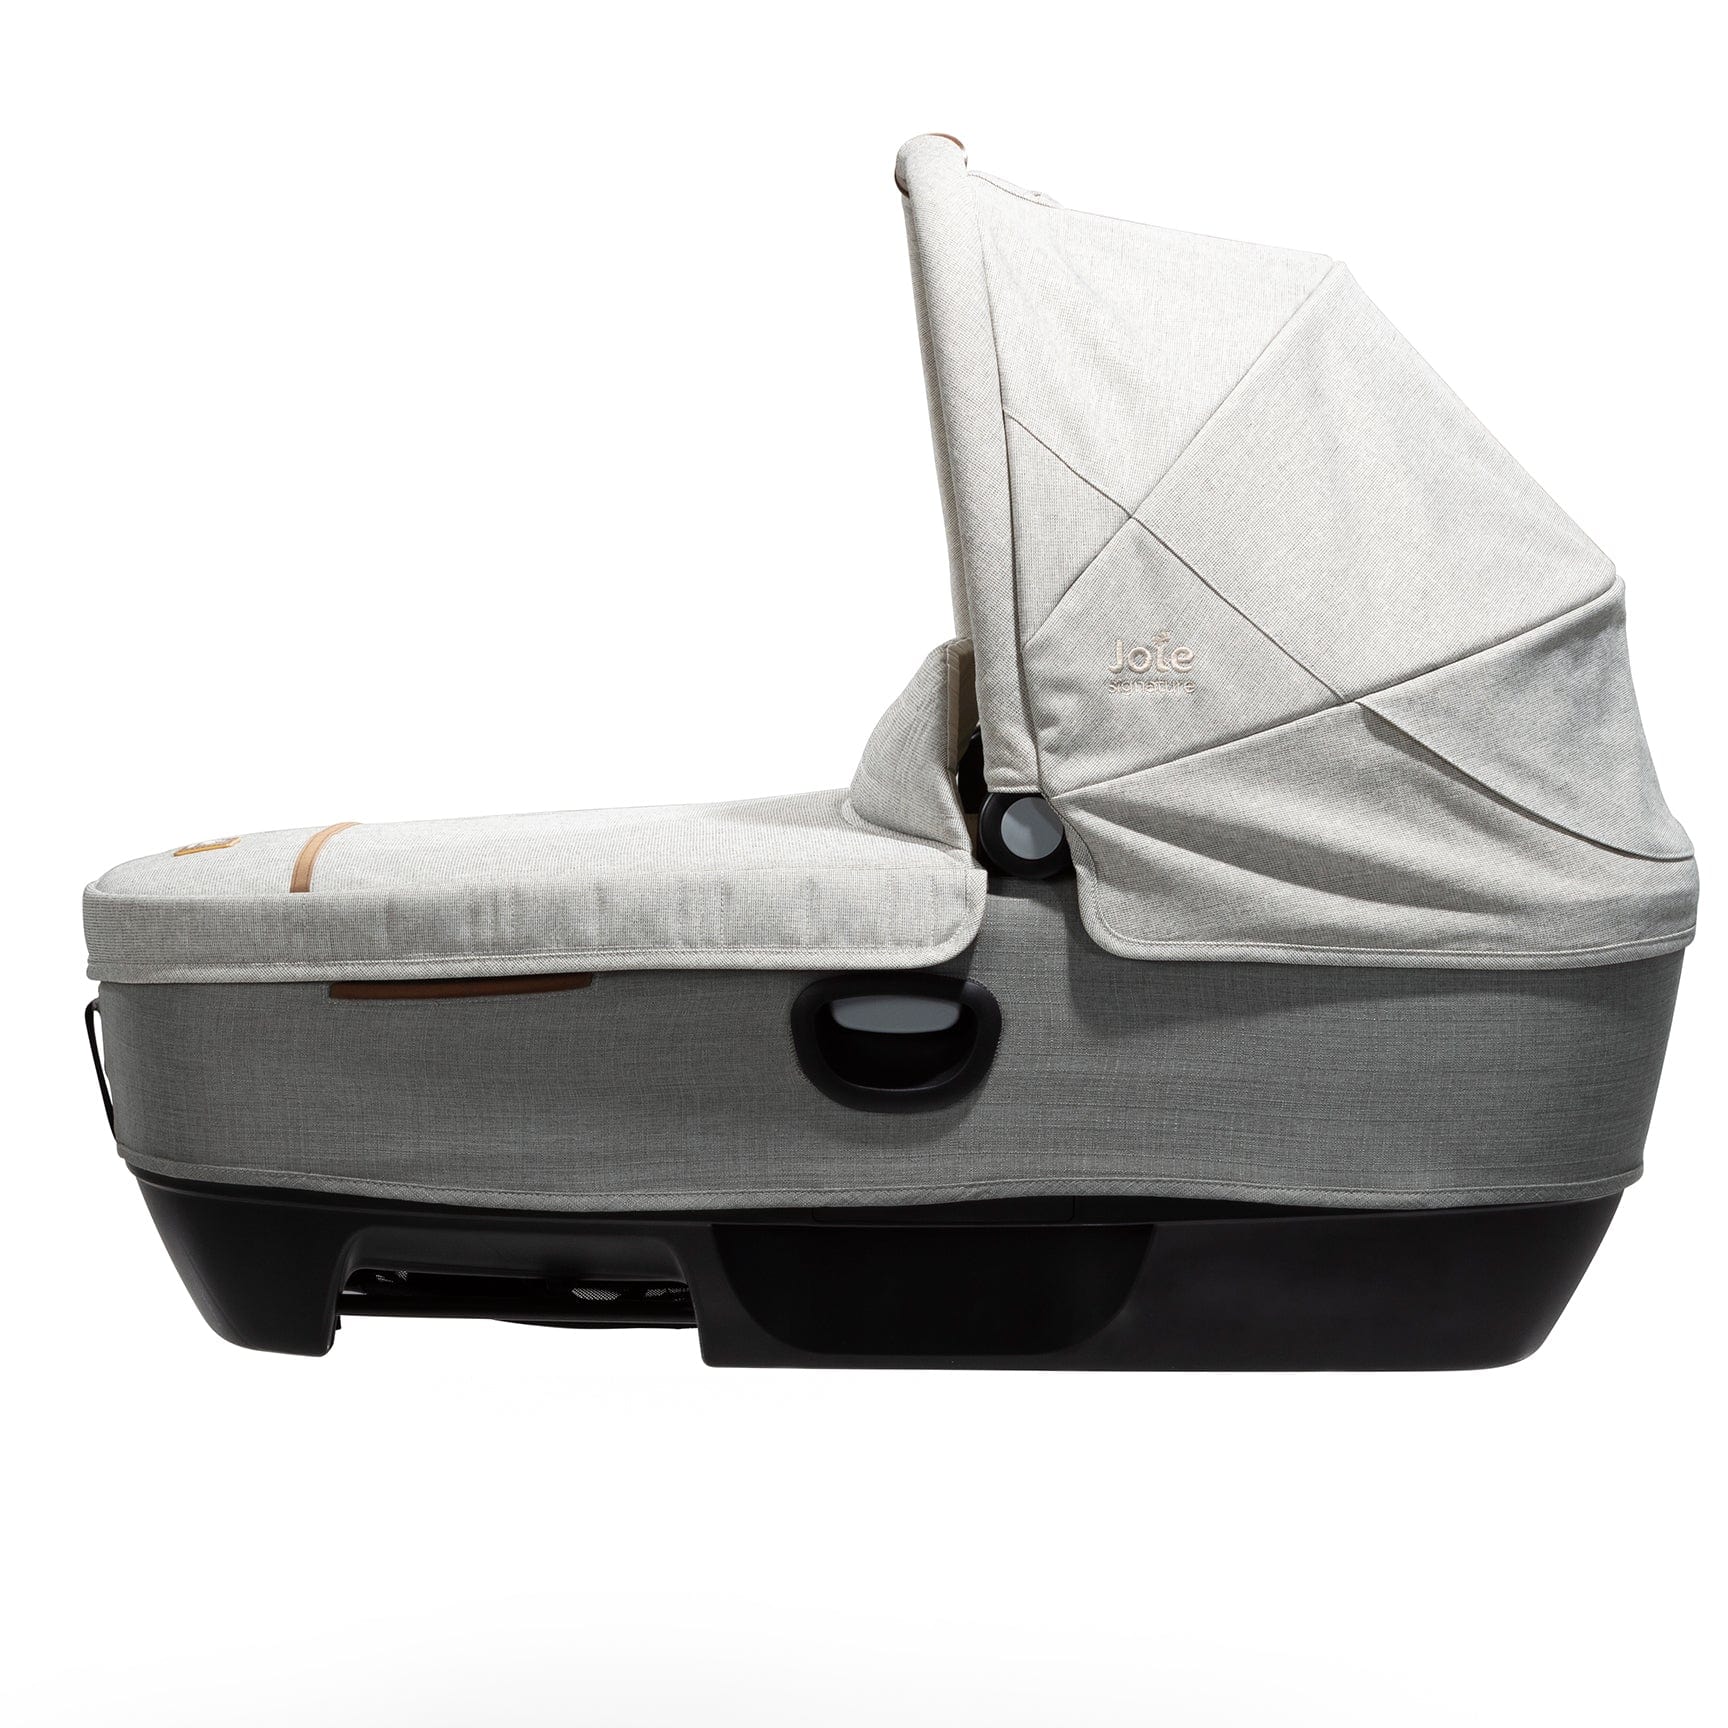 Joie Calmi Car Cot Bed & I-Base Encore in Oyster 0-76 cm (Infant carriers) 12219-OYS 5056080612423